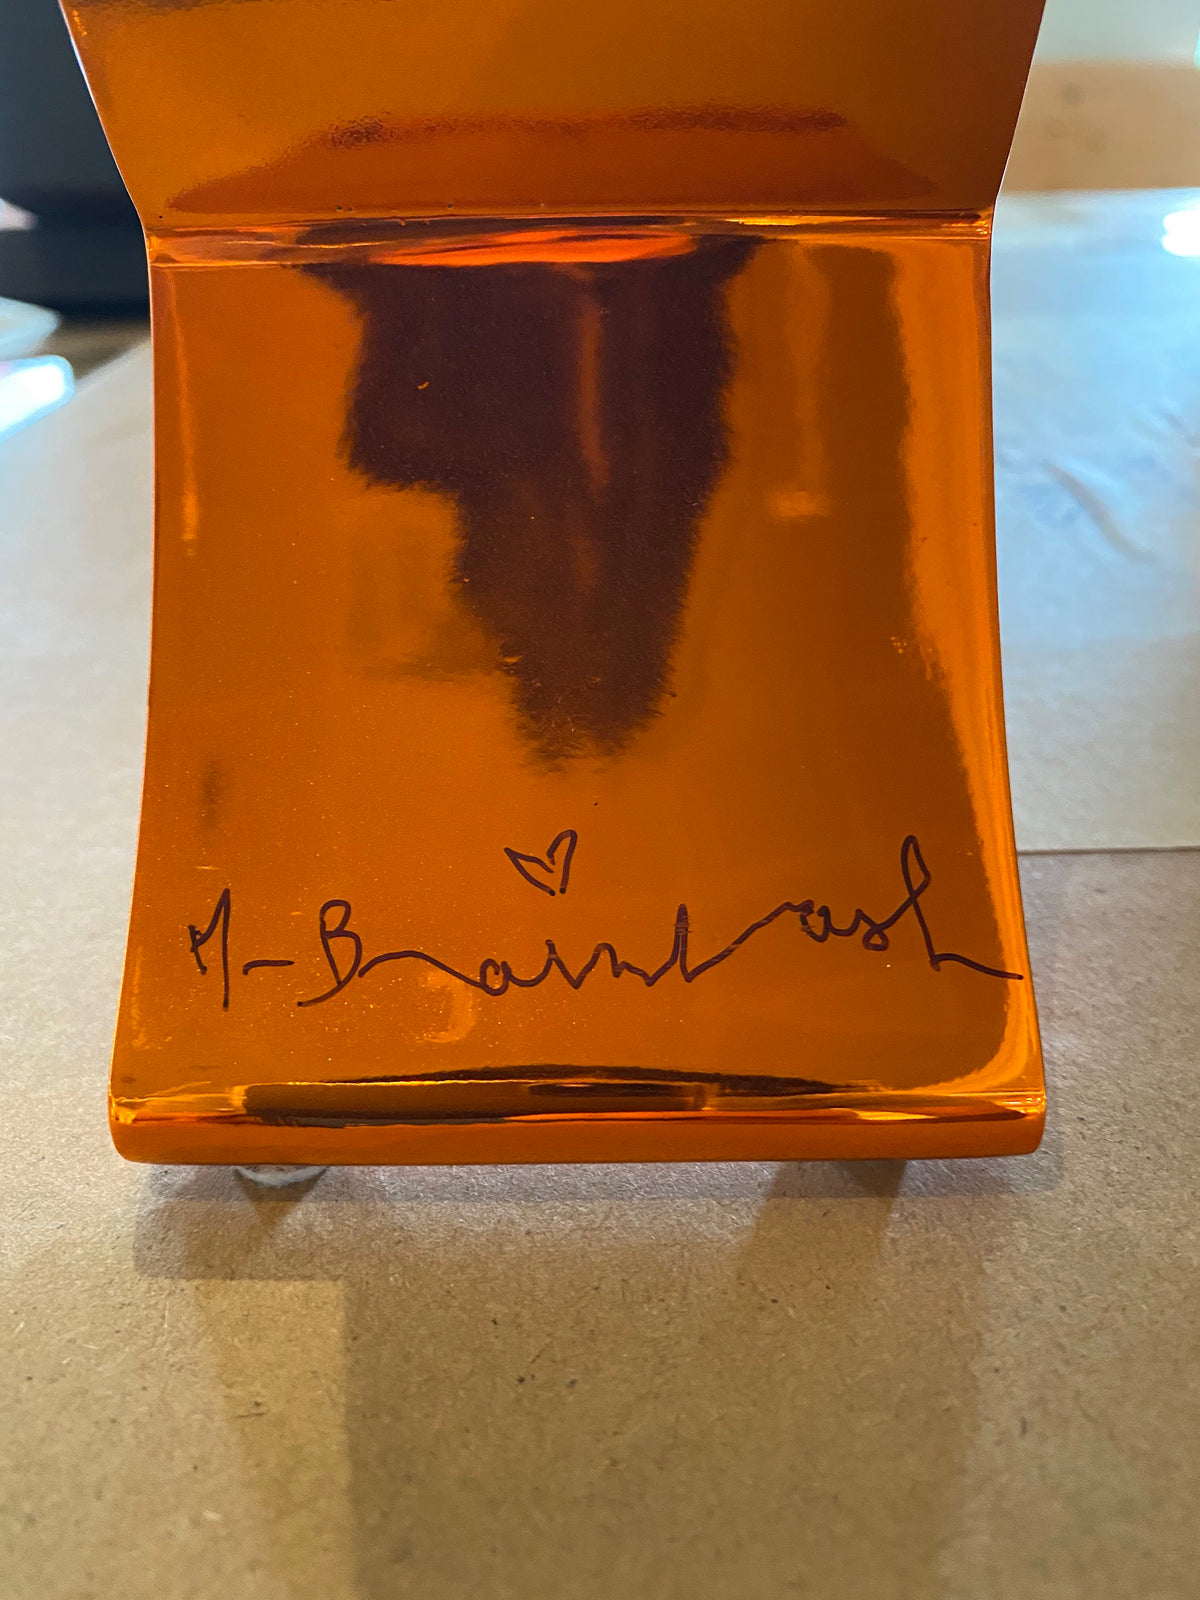 A reflective piece of orange metal with a signature on it